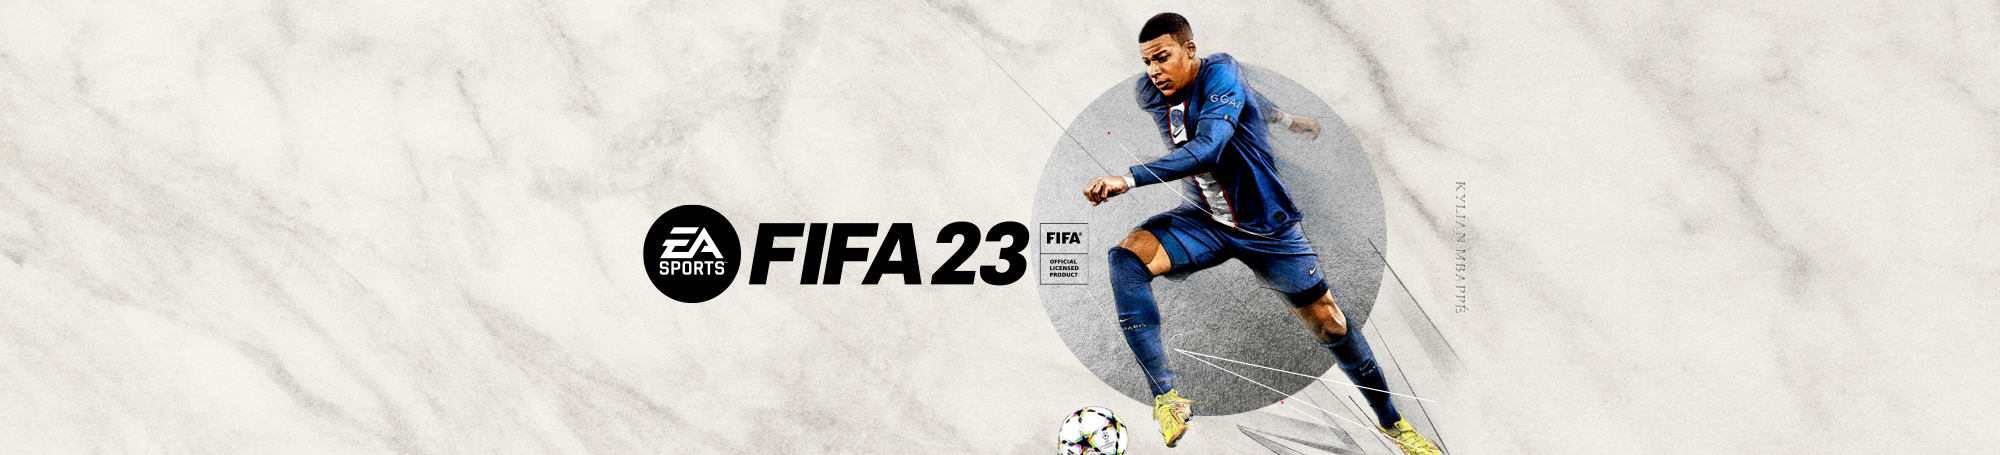 Soccer player Kylian Mbappé. EA Sports. FIFA 23. Official licensed product.